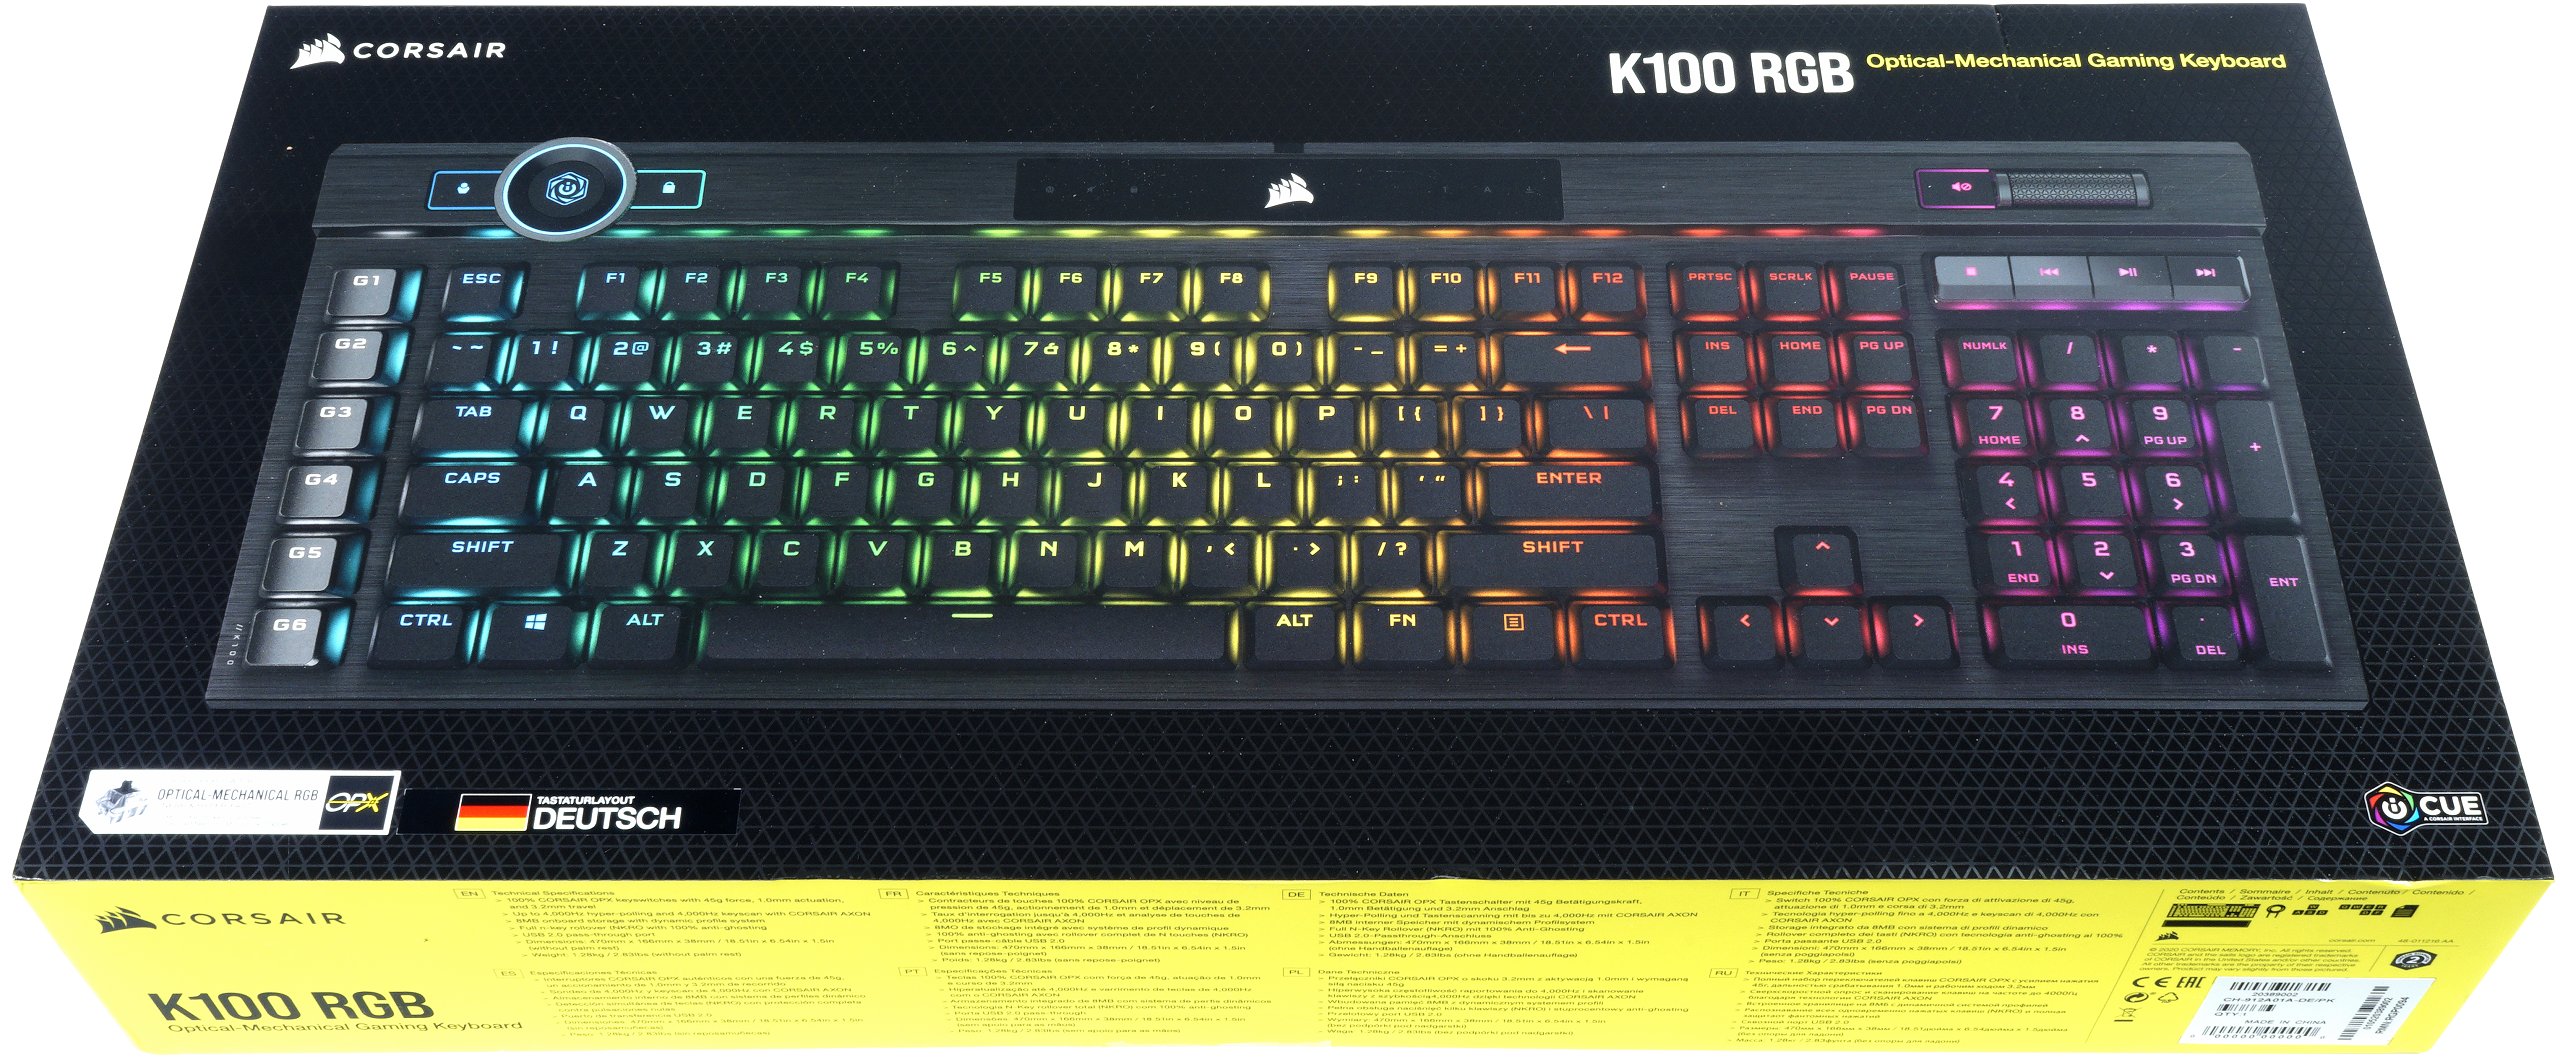 Corsair K100 RGB Keyboard Review - noble flagship with new OPX